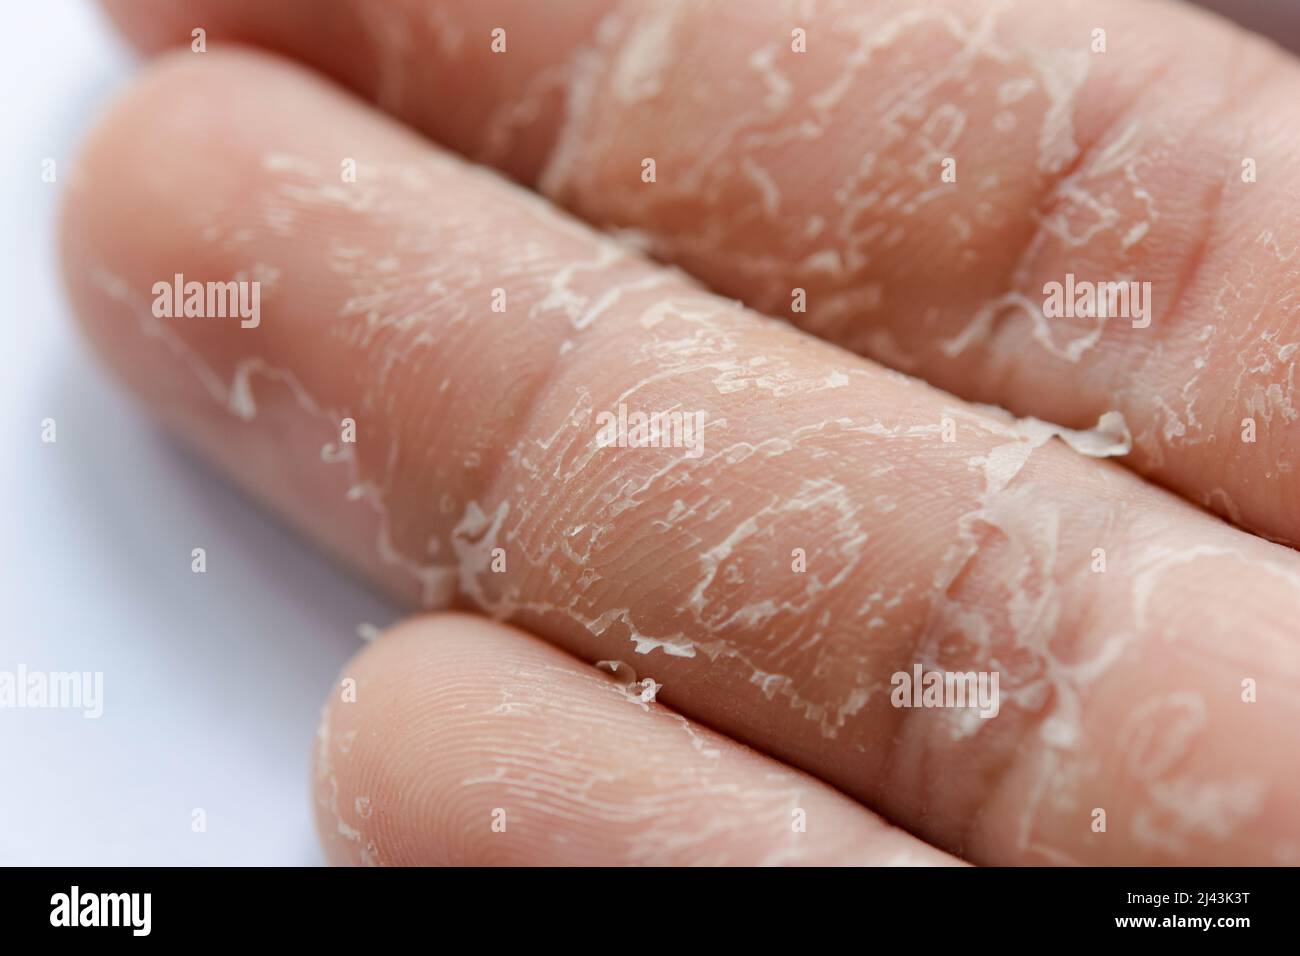 Skin Peeling: 9 Causes (with Pictures) & What to Do - Tua Saúde